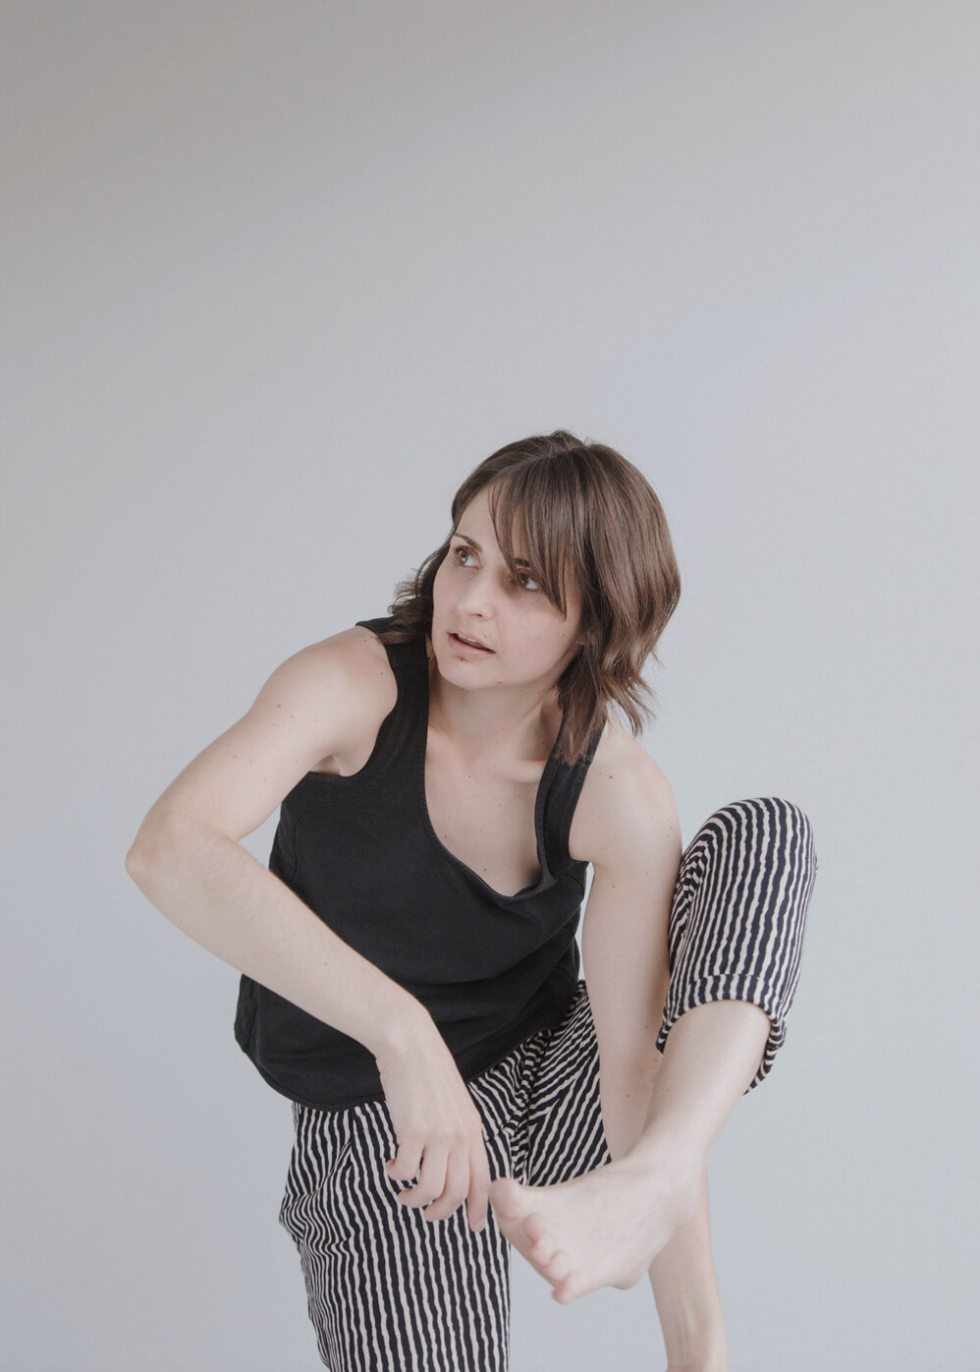 Elisabeth Motley, a white woman with brown eyes, chin-length layered brown hair with bangs, dances in front of a light gray backdrop. She wears a sleeveless black shirt and black and white thin-striped ankle-length pants and is barefoot. She stands on her right leg with her left leg hooked in a front attitude, and she crouches asymmetrically so as to touch the side of her right index finger to the base of her left big toe. Her left arm reaches down through the hole created by her right arm and left leg. She looks up on a shallow diagonal to the right, lips slightly parted.